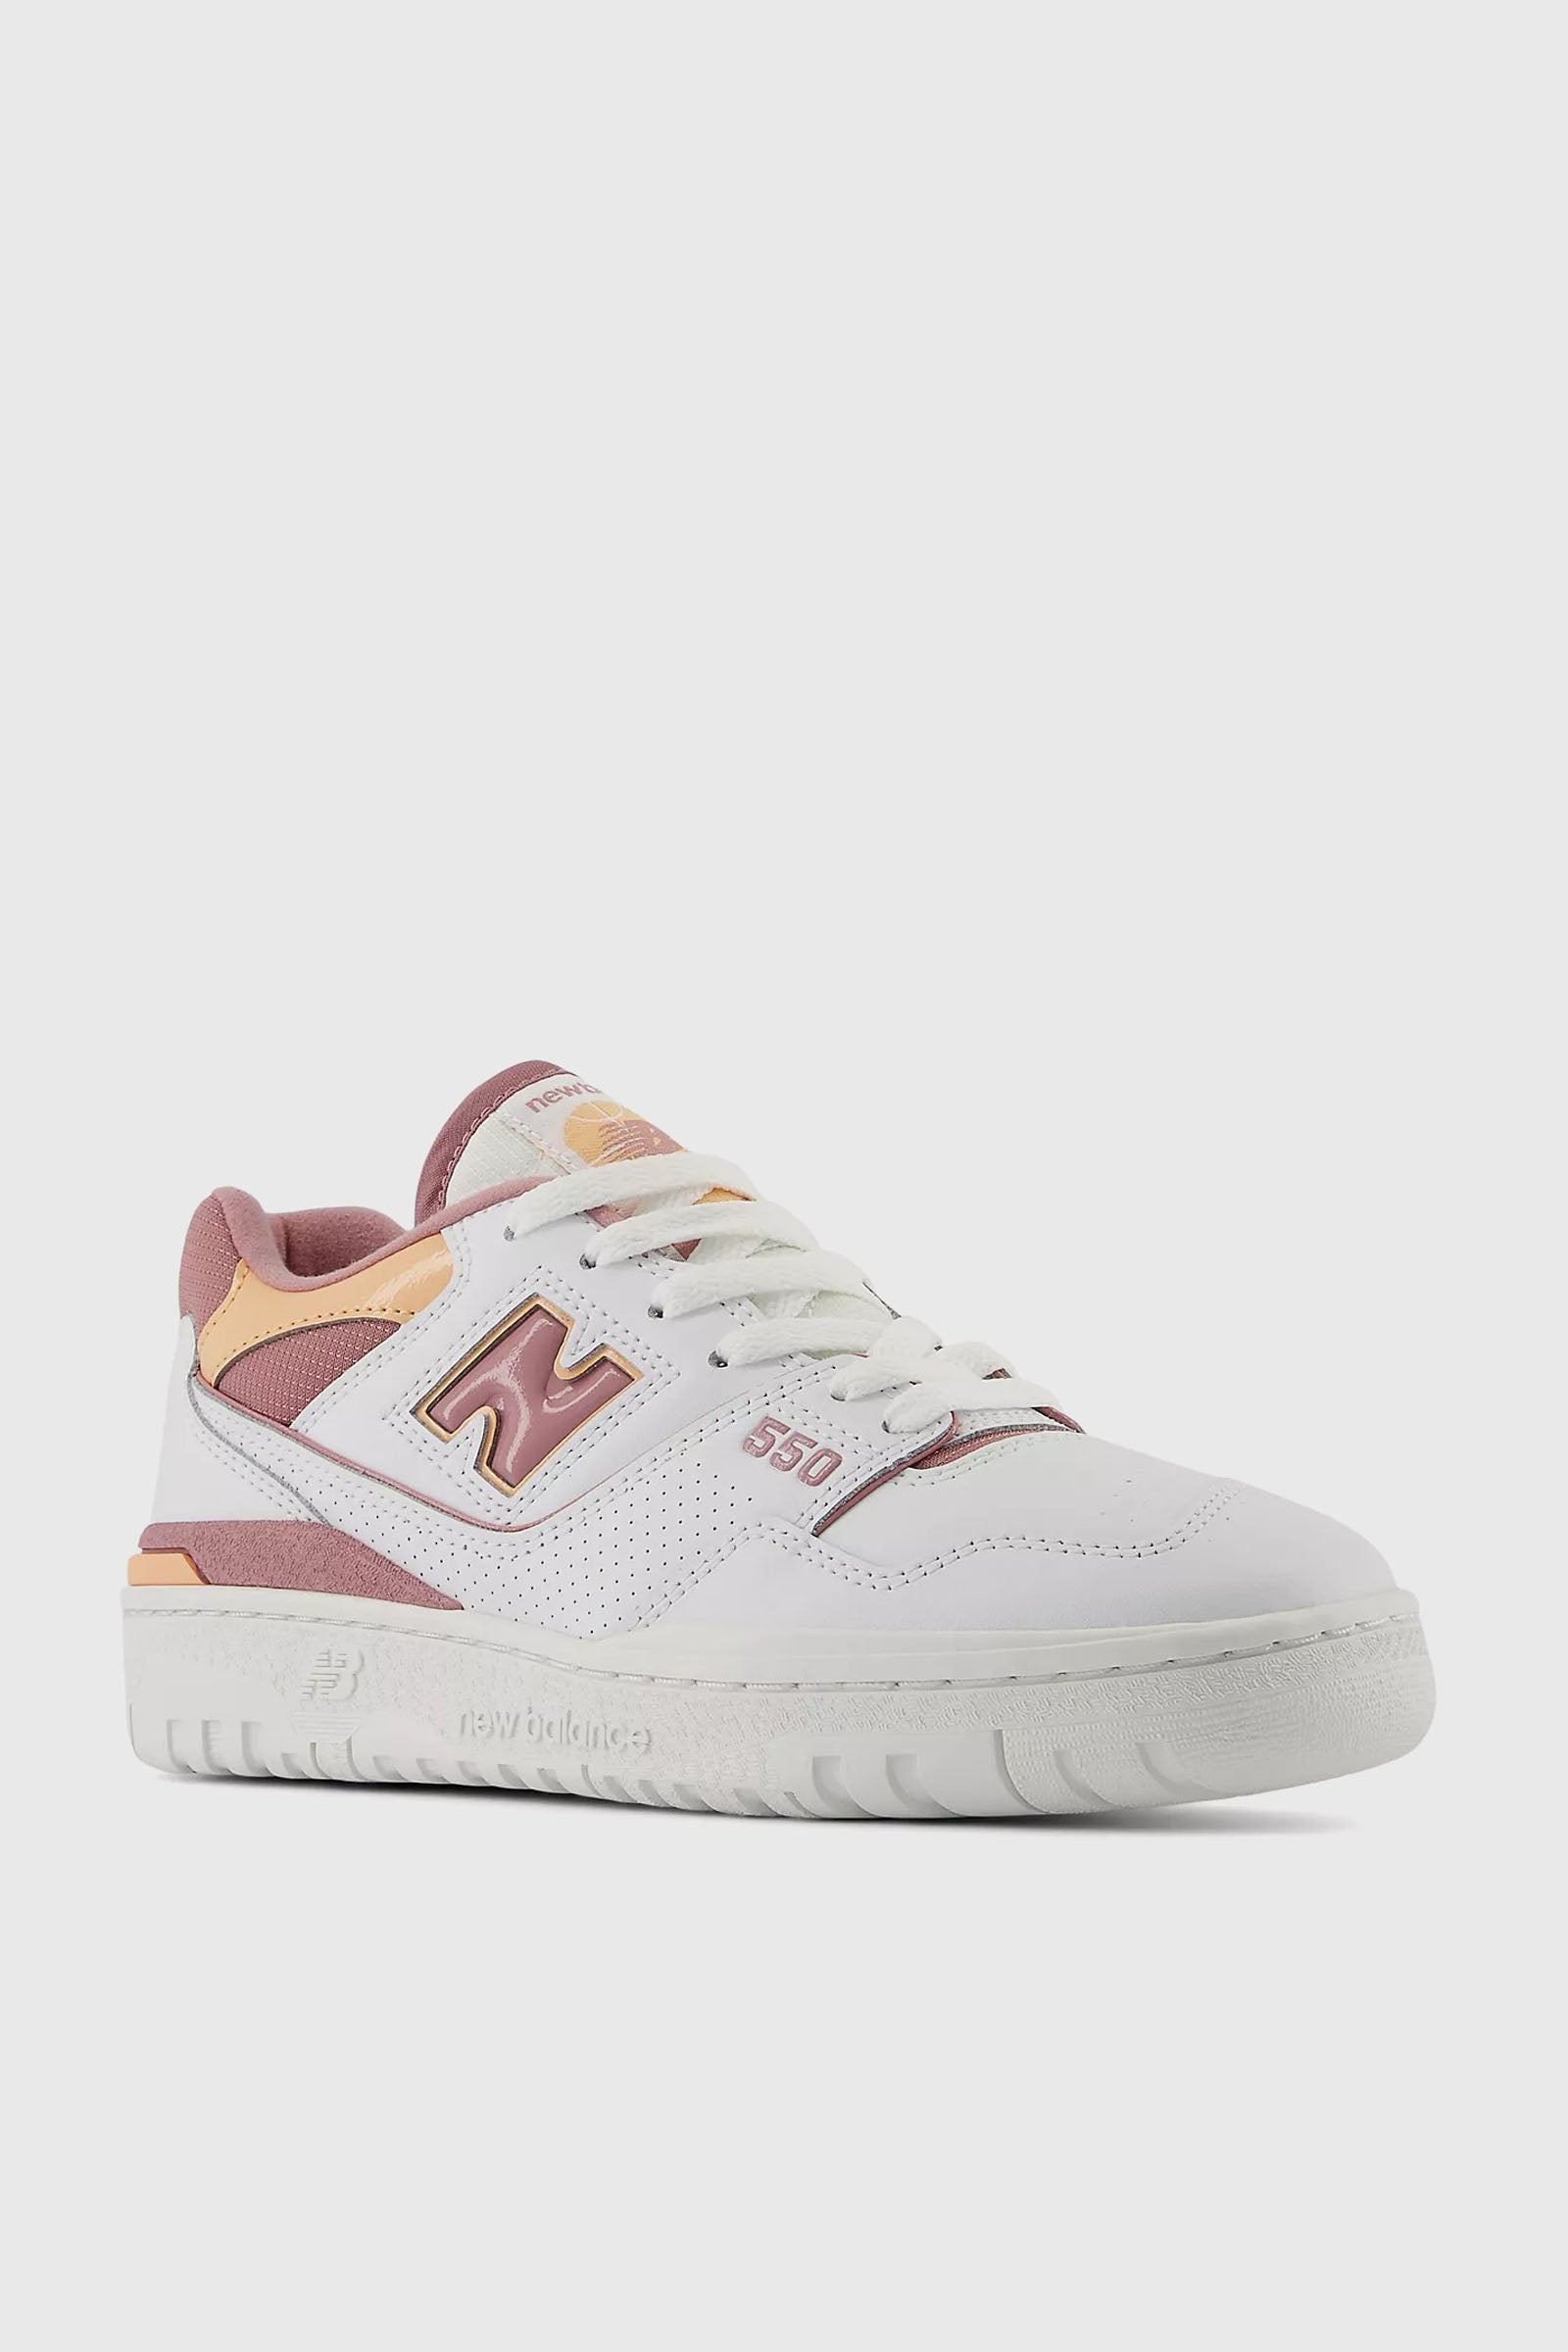 New Balance Sneaker 550 Leather White/Pink - 2